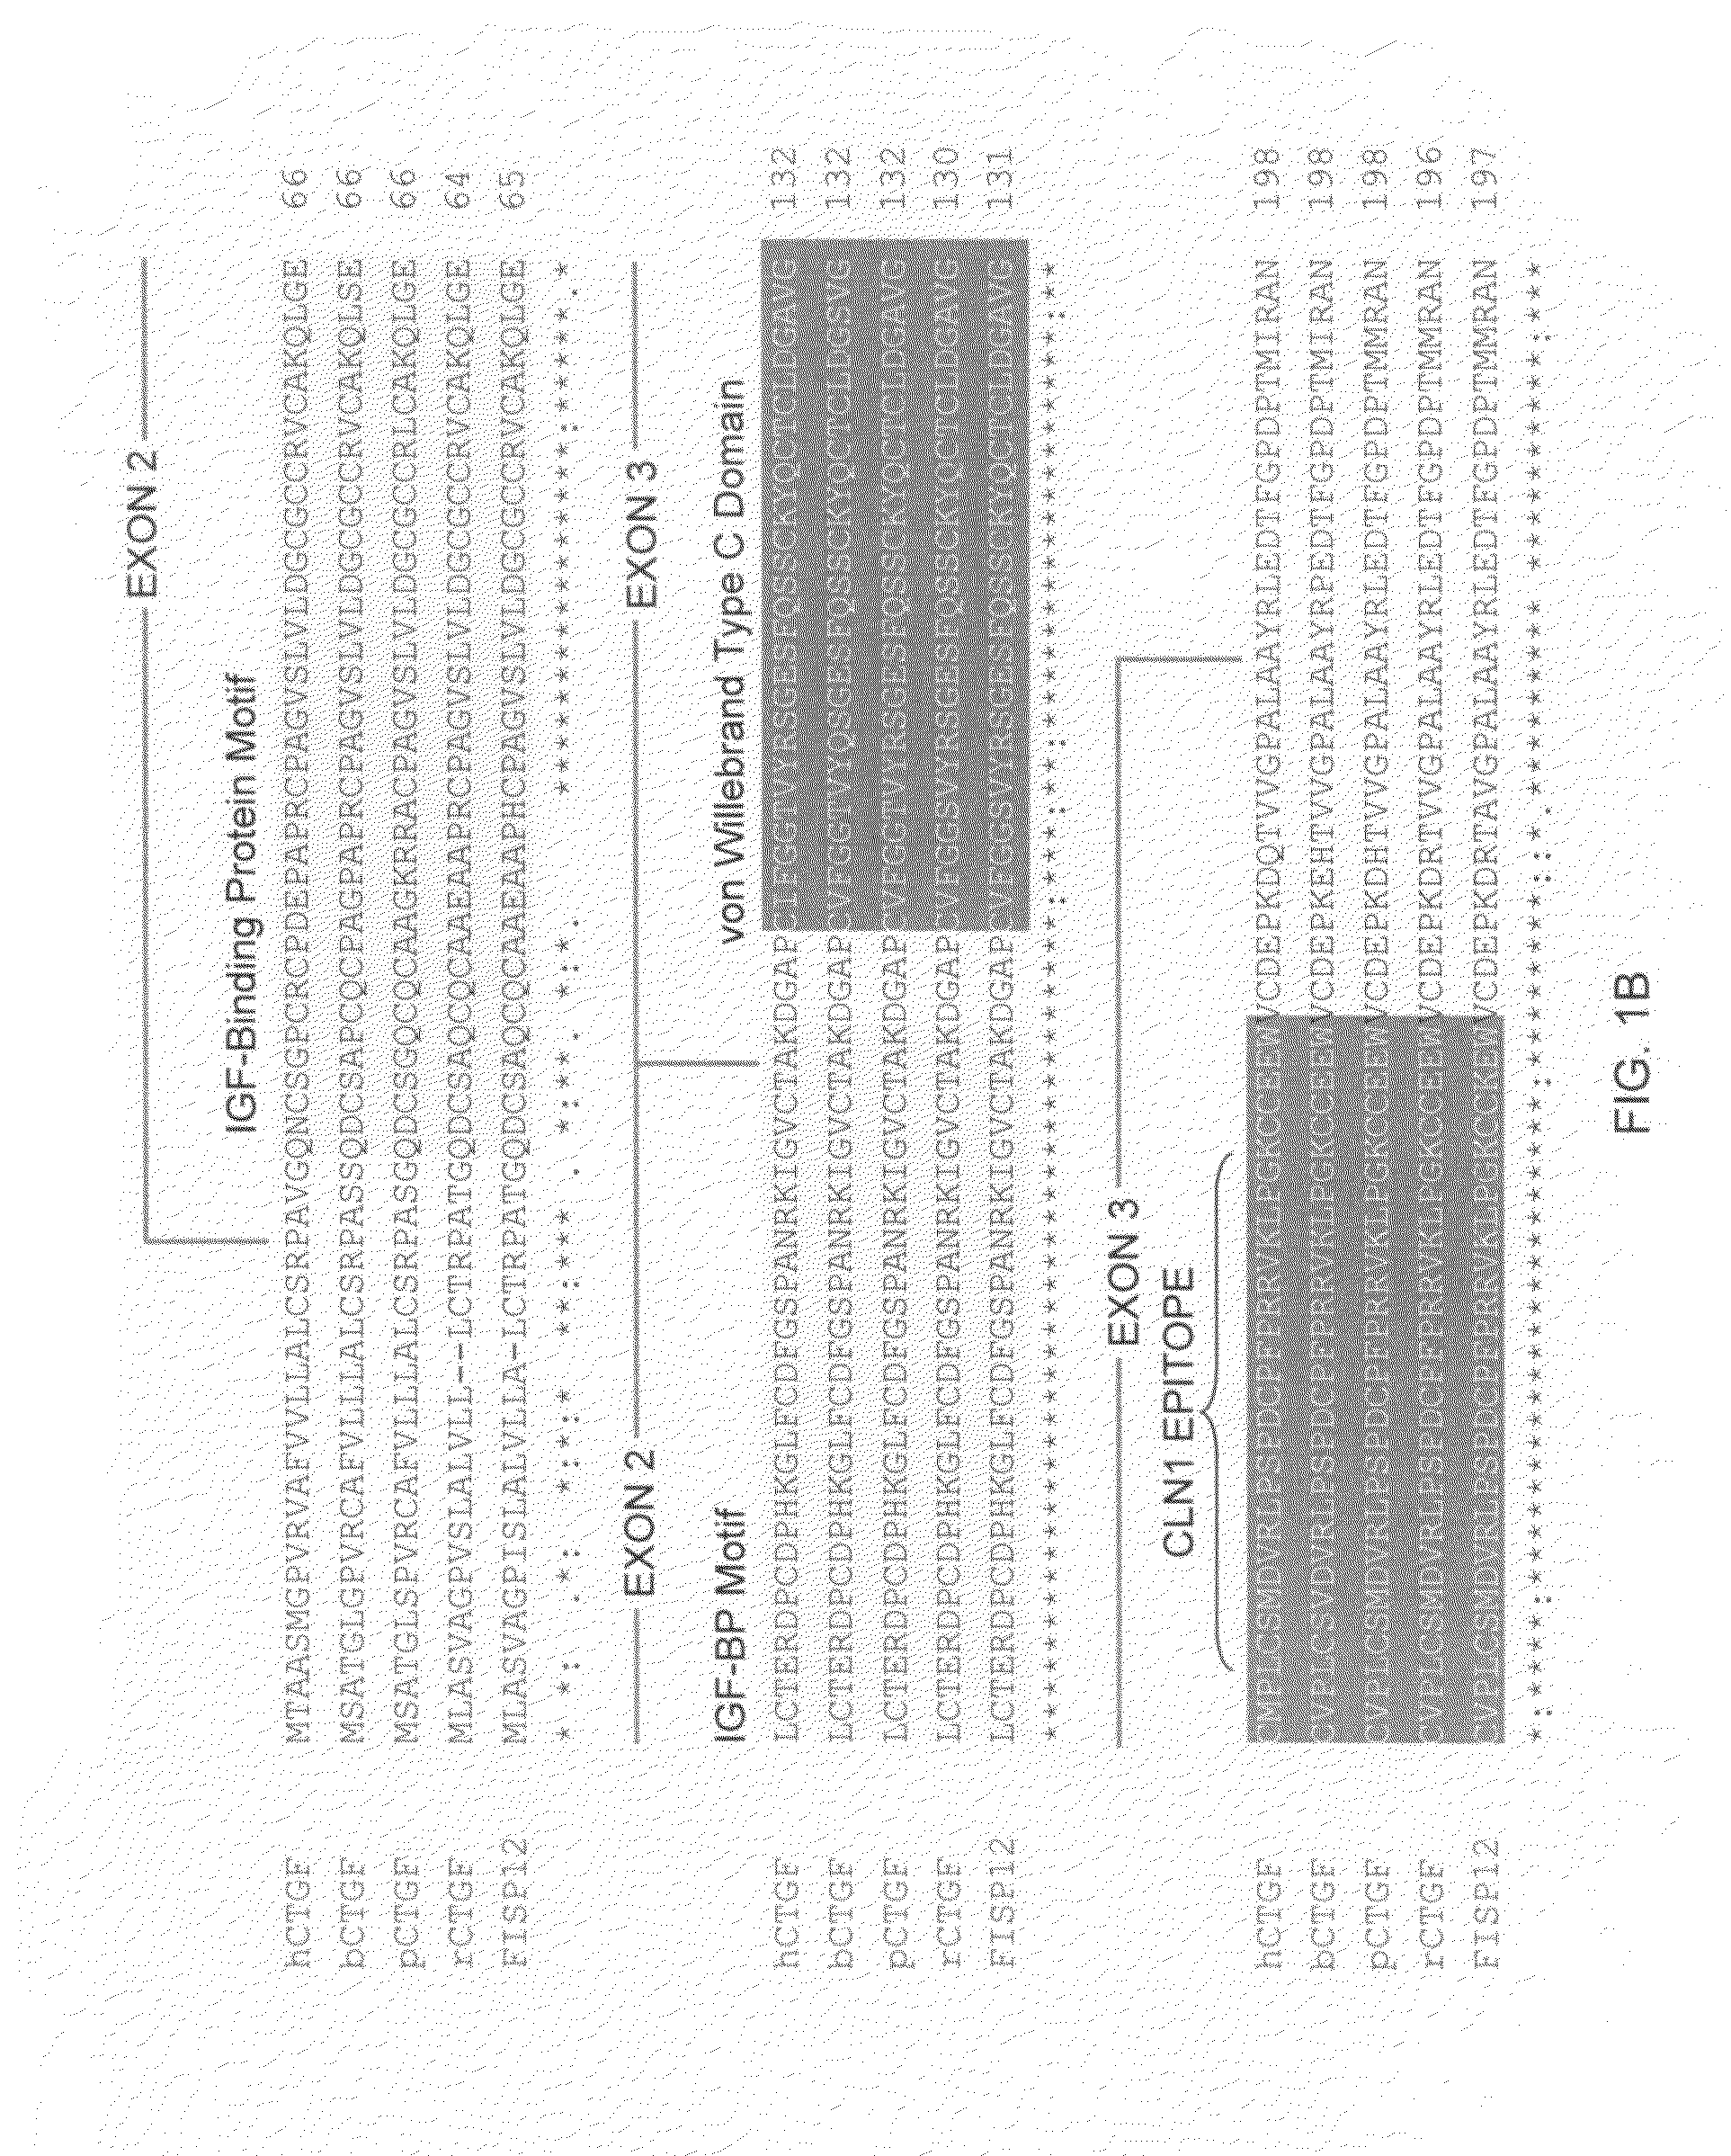 Antibodies that bind to a portion of the VWC domain of connective tissue growth factor